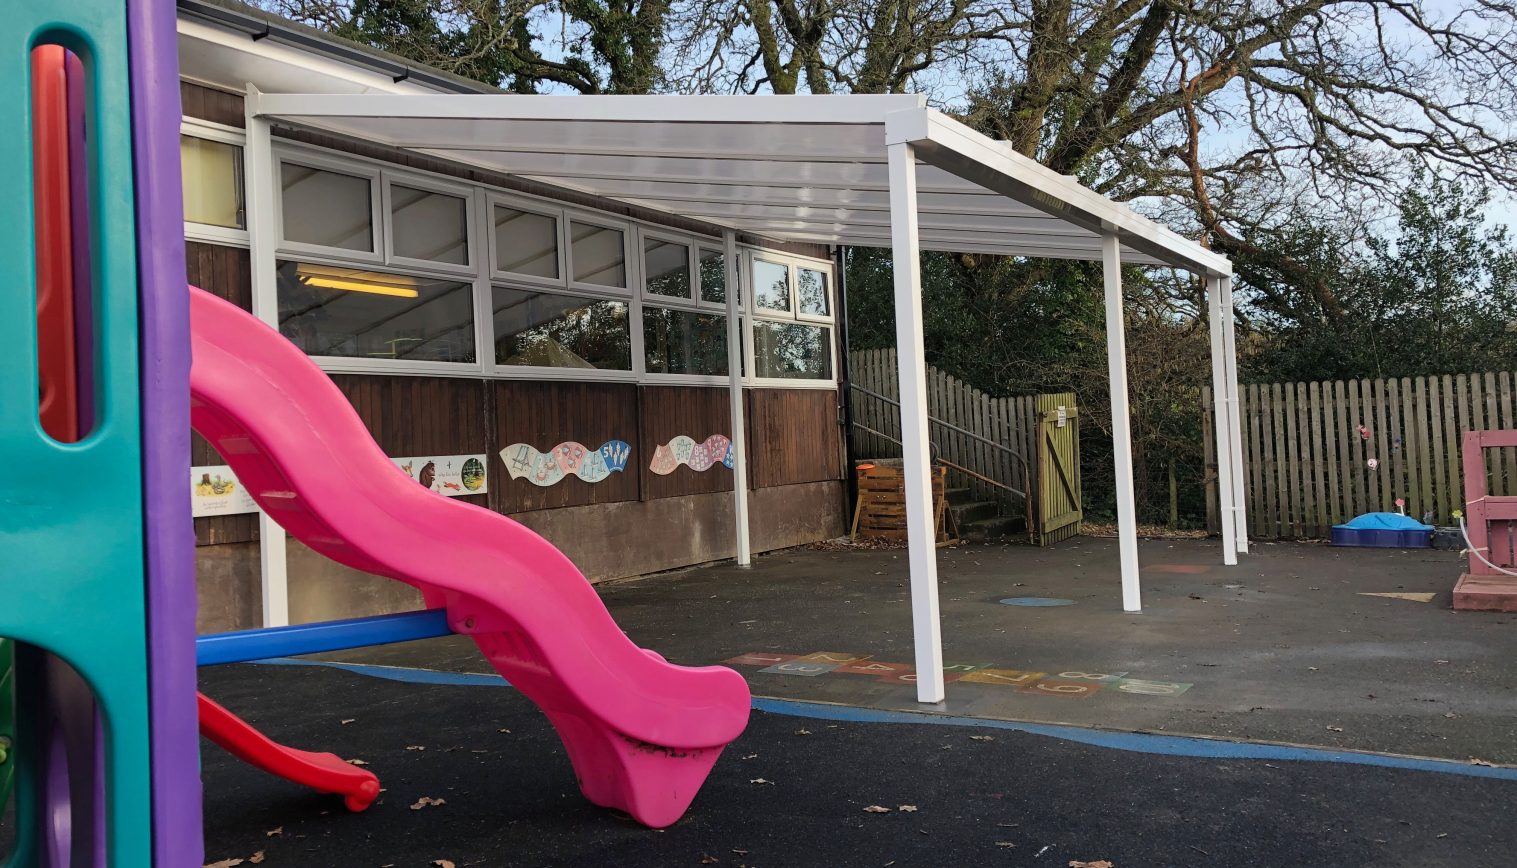 Whitchurch Community Primary School Third Install